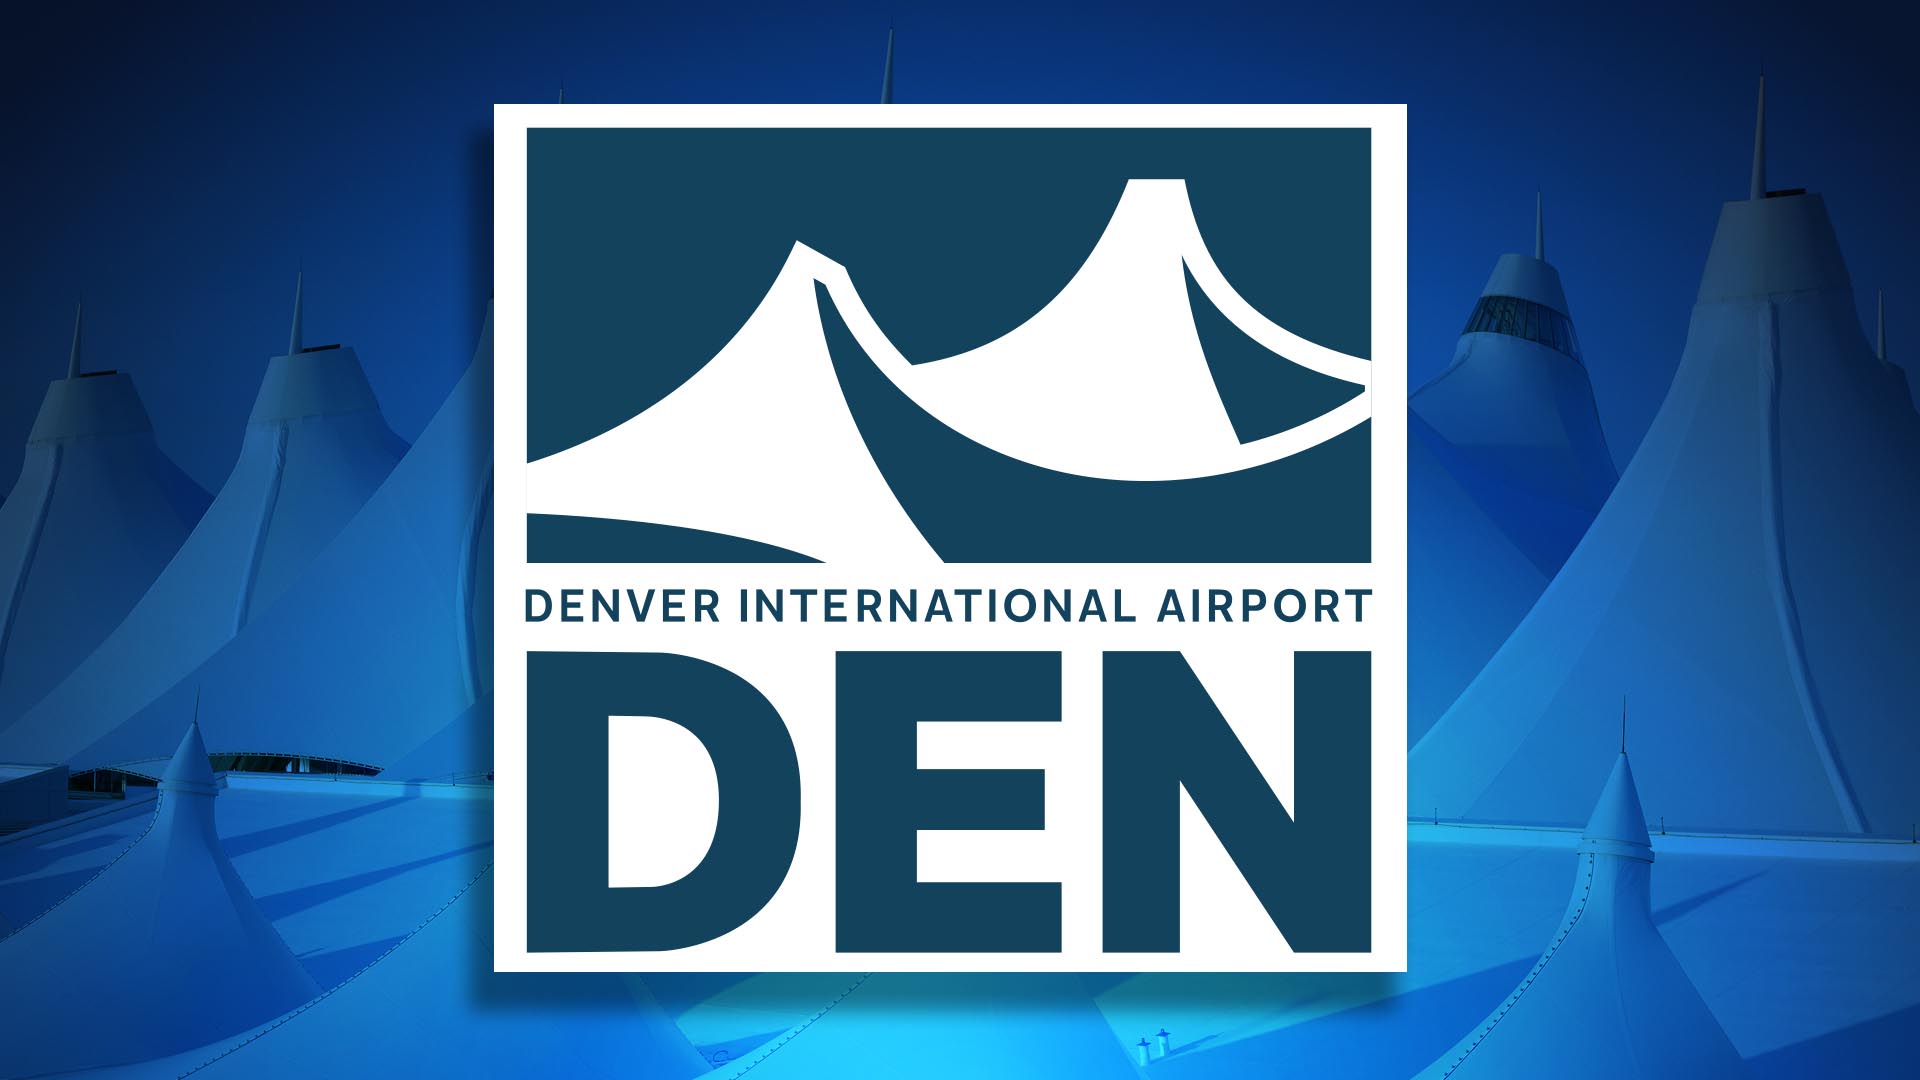 Snow At Denver International Airport Leads To Brief Ground Stop, Higher Than Average Number Of Delays